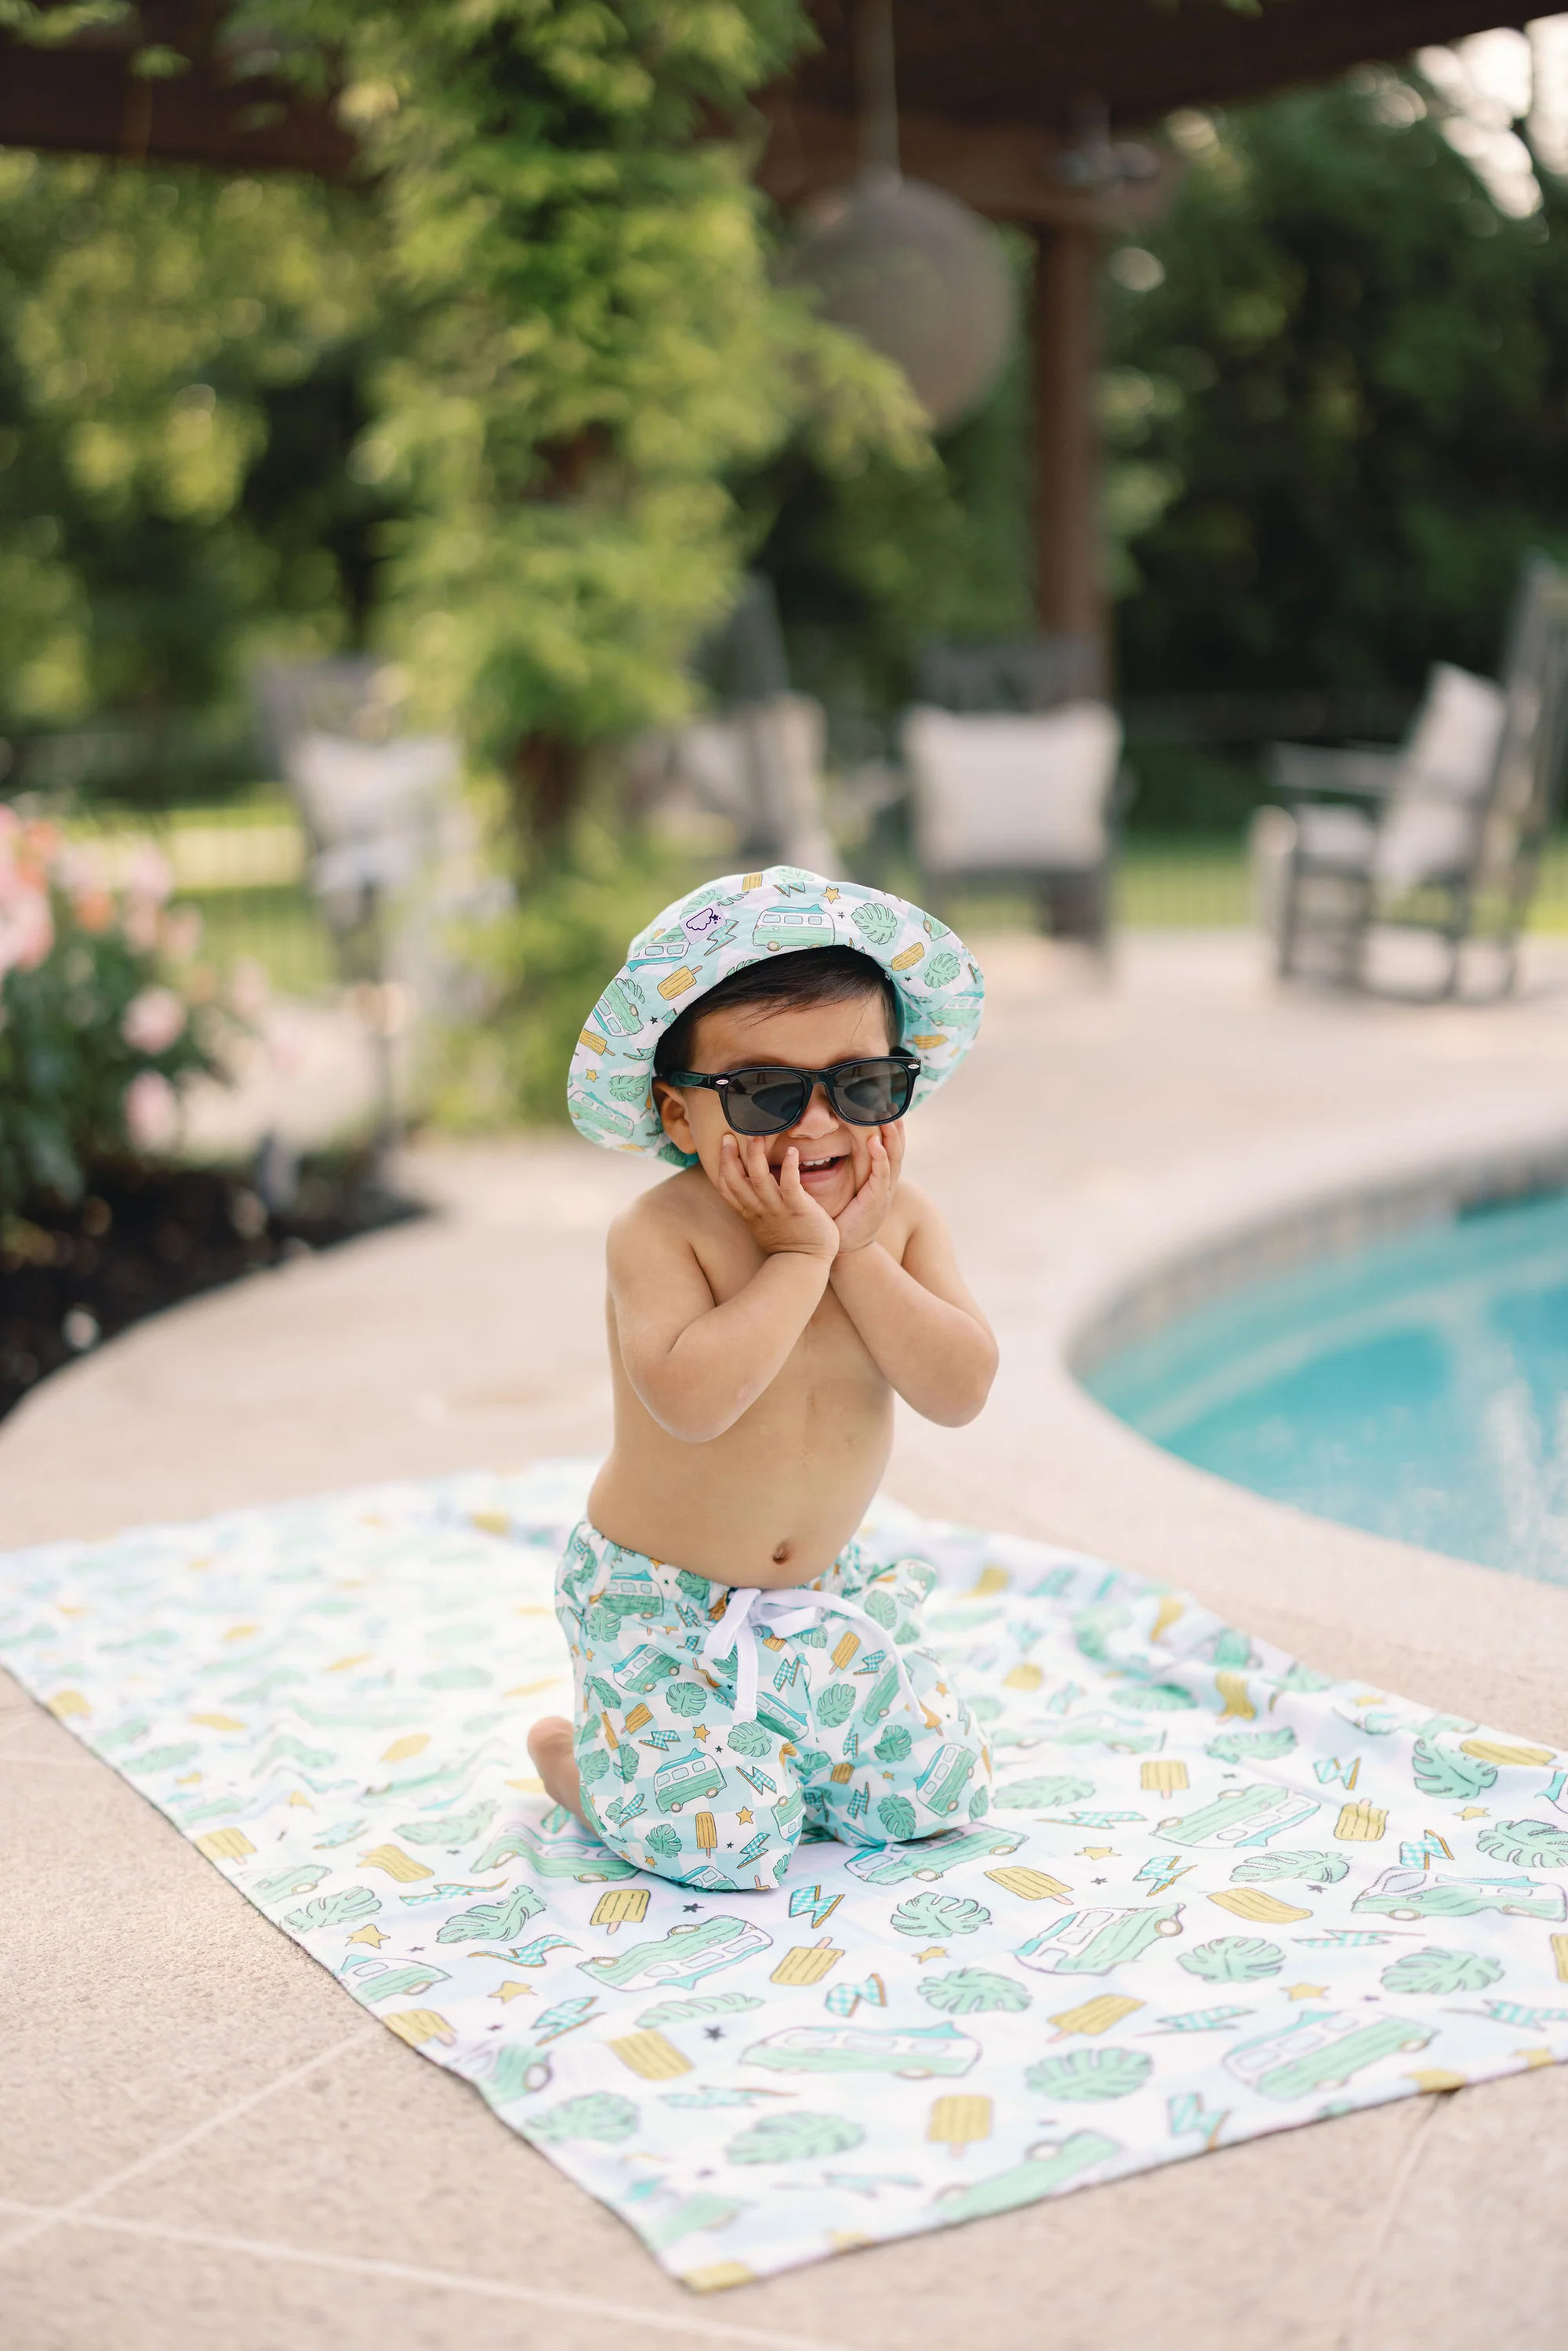 EXCLUSIVE CHECKED OUT FOR SUMMER DREAM SWIM TRUNKS | DREAM BIG LITTLE CO